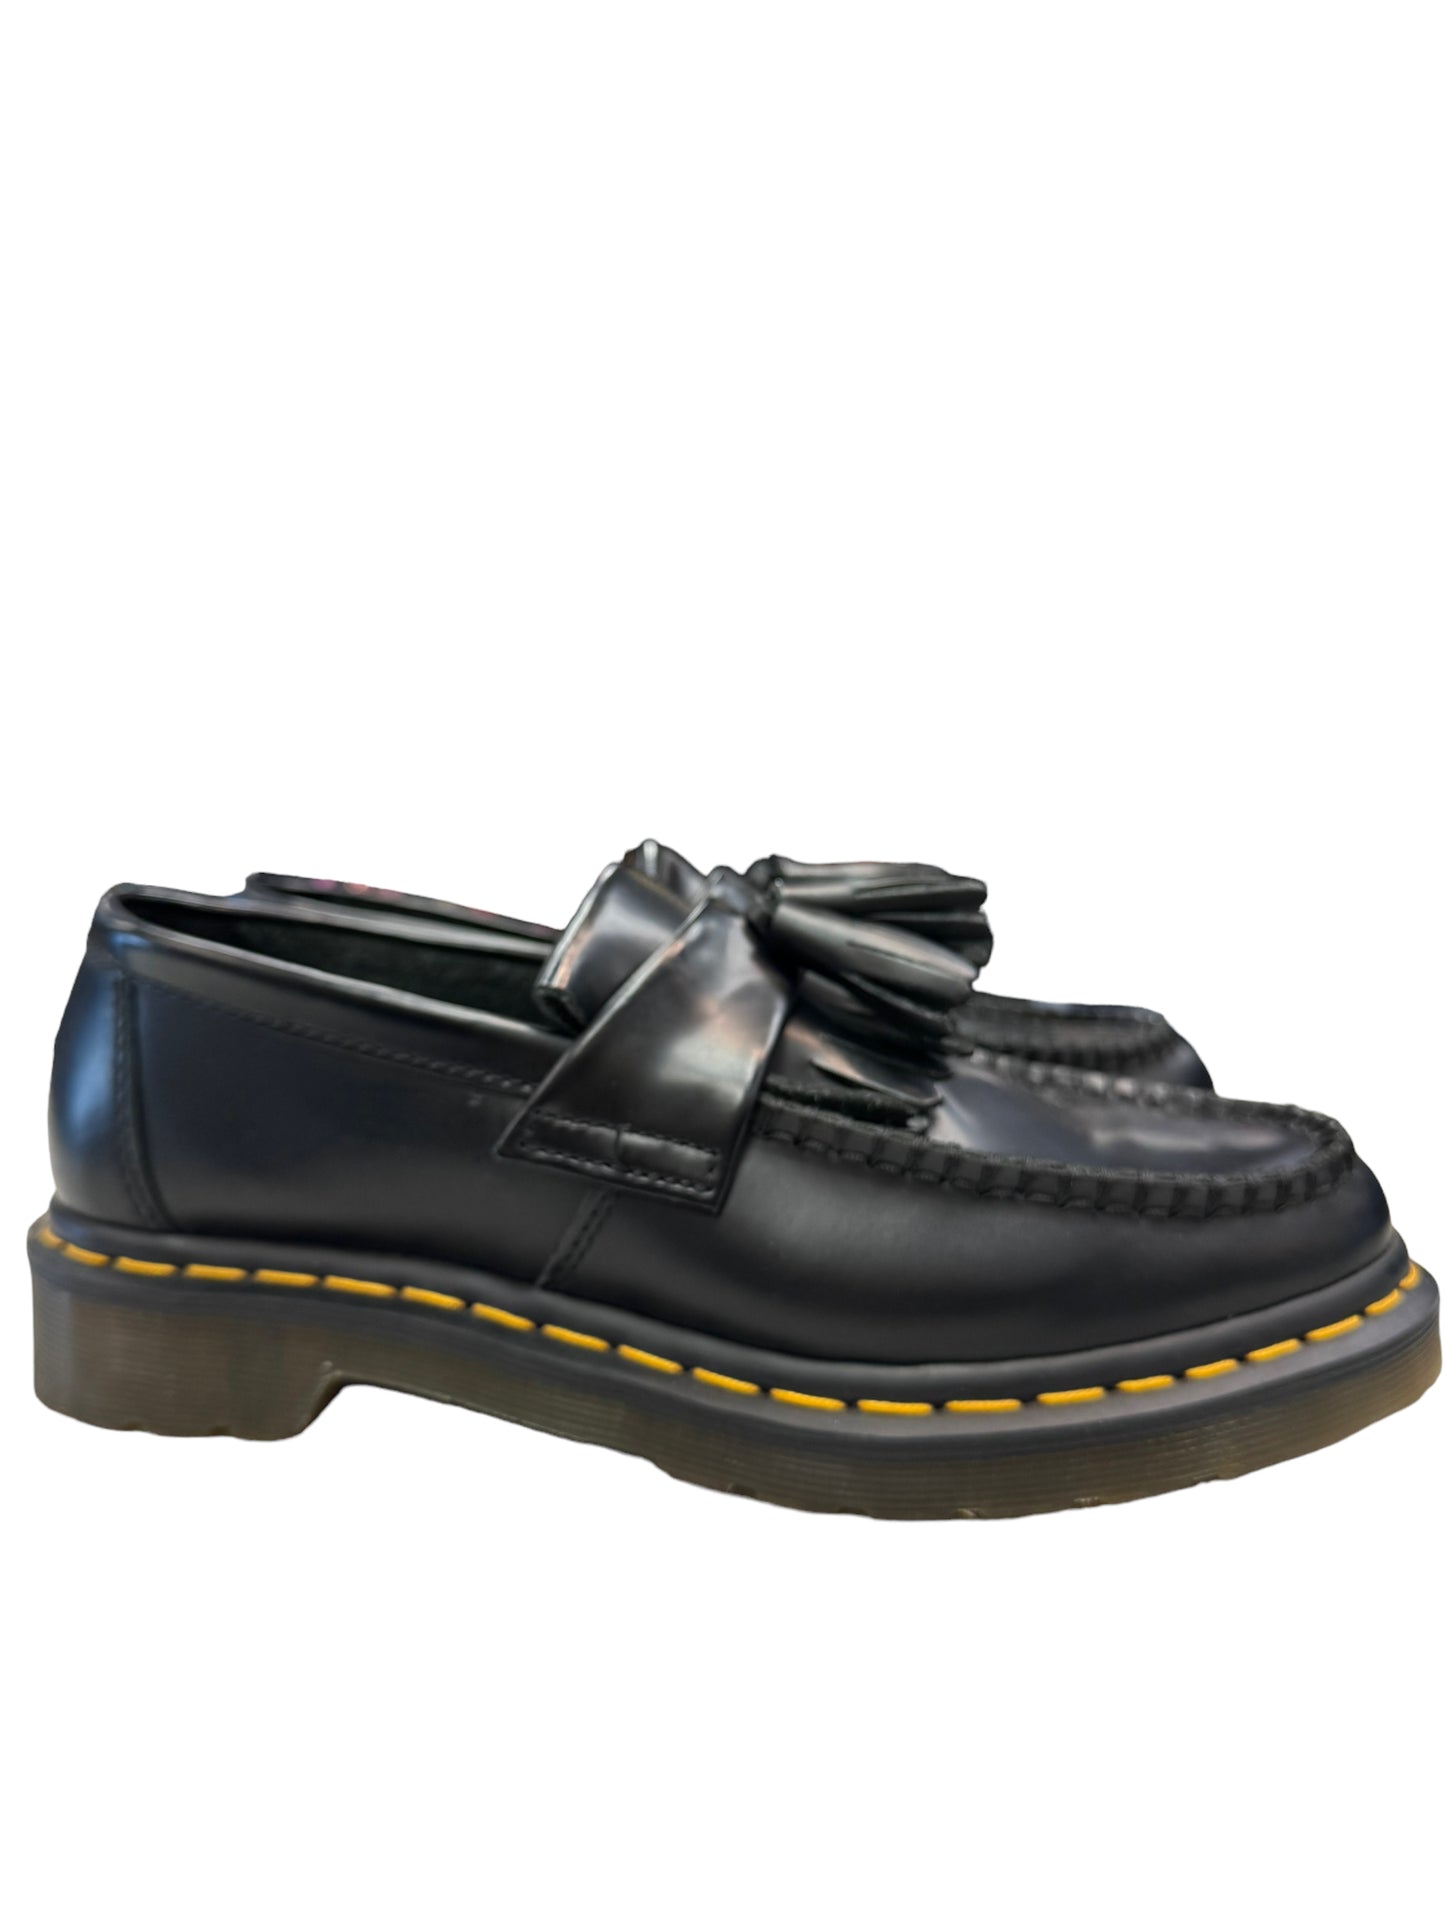 Shoes Flats By Dr Martens  Size: 8